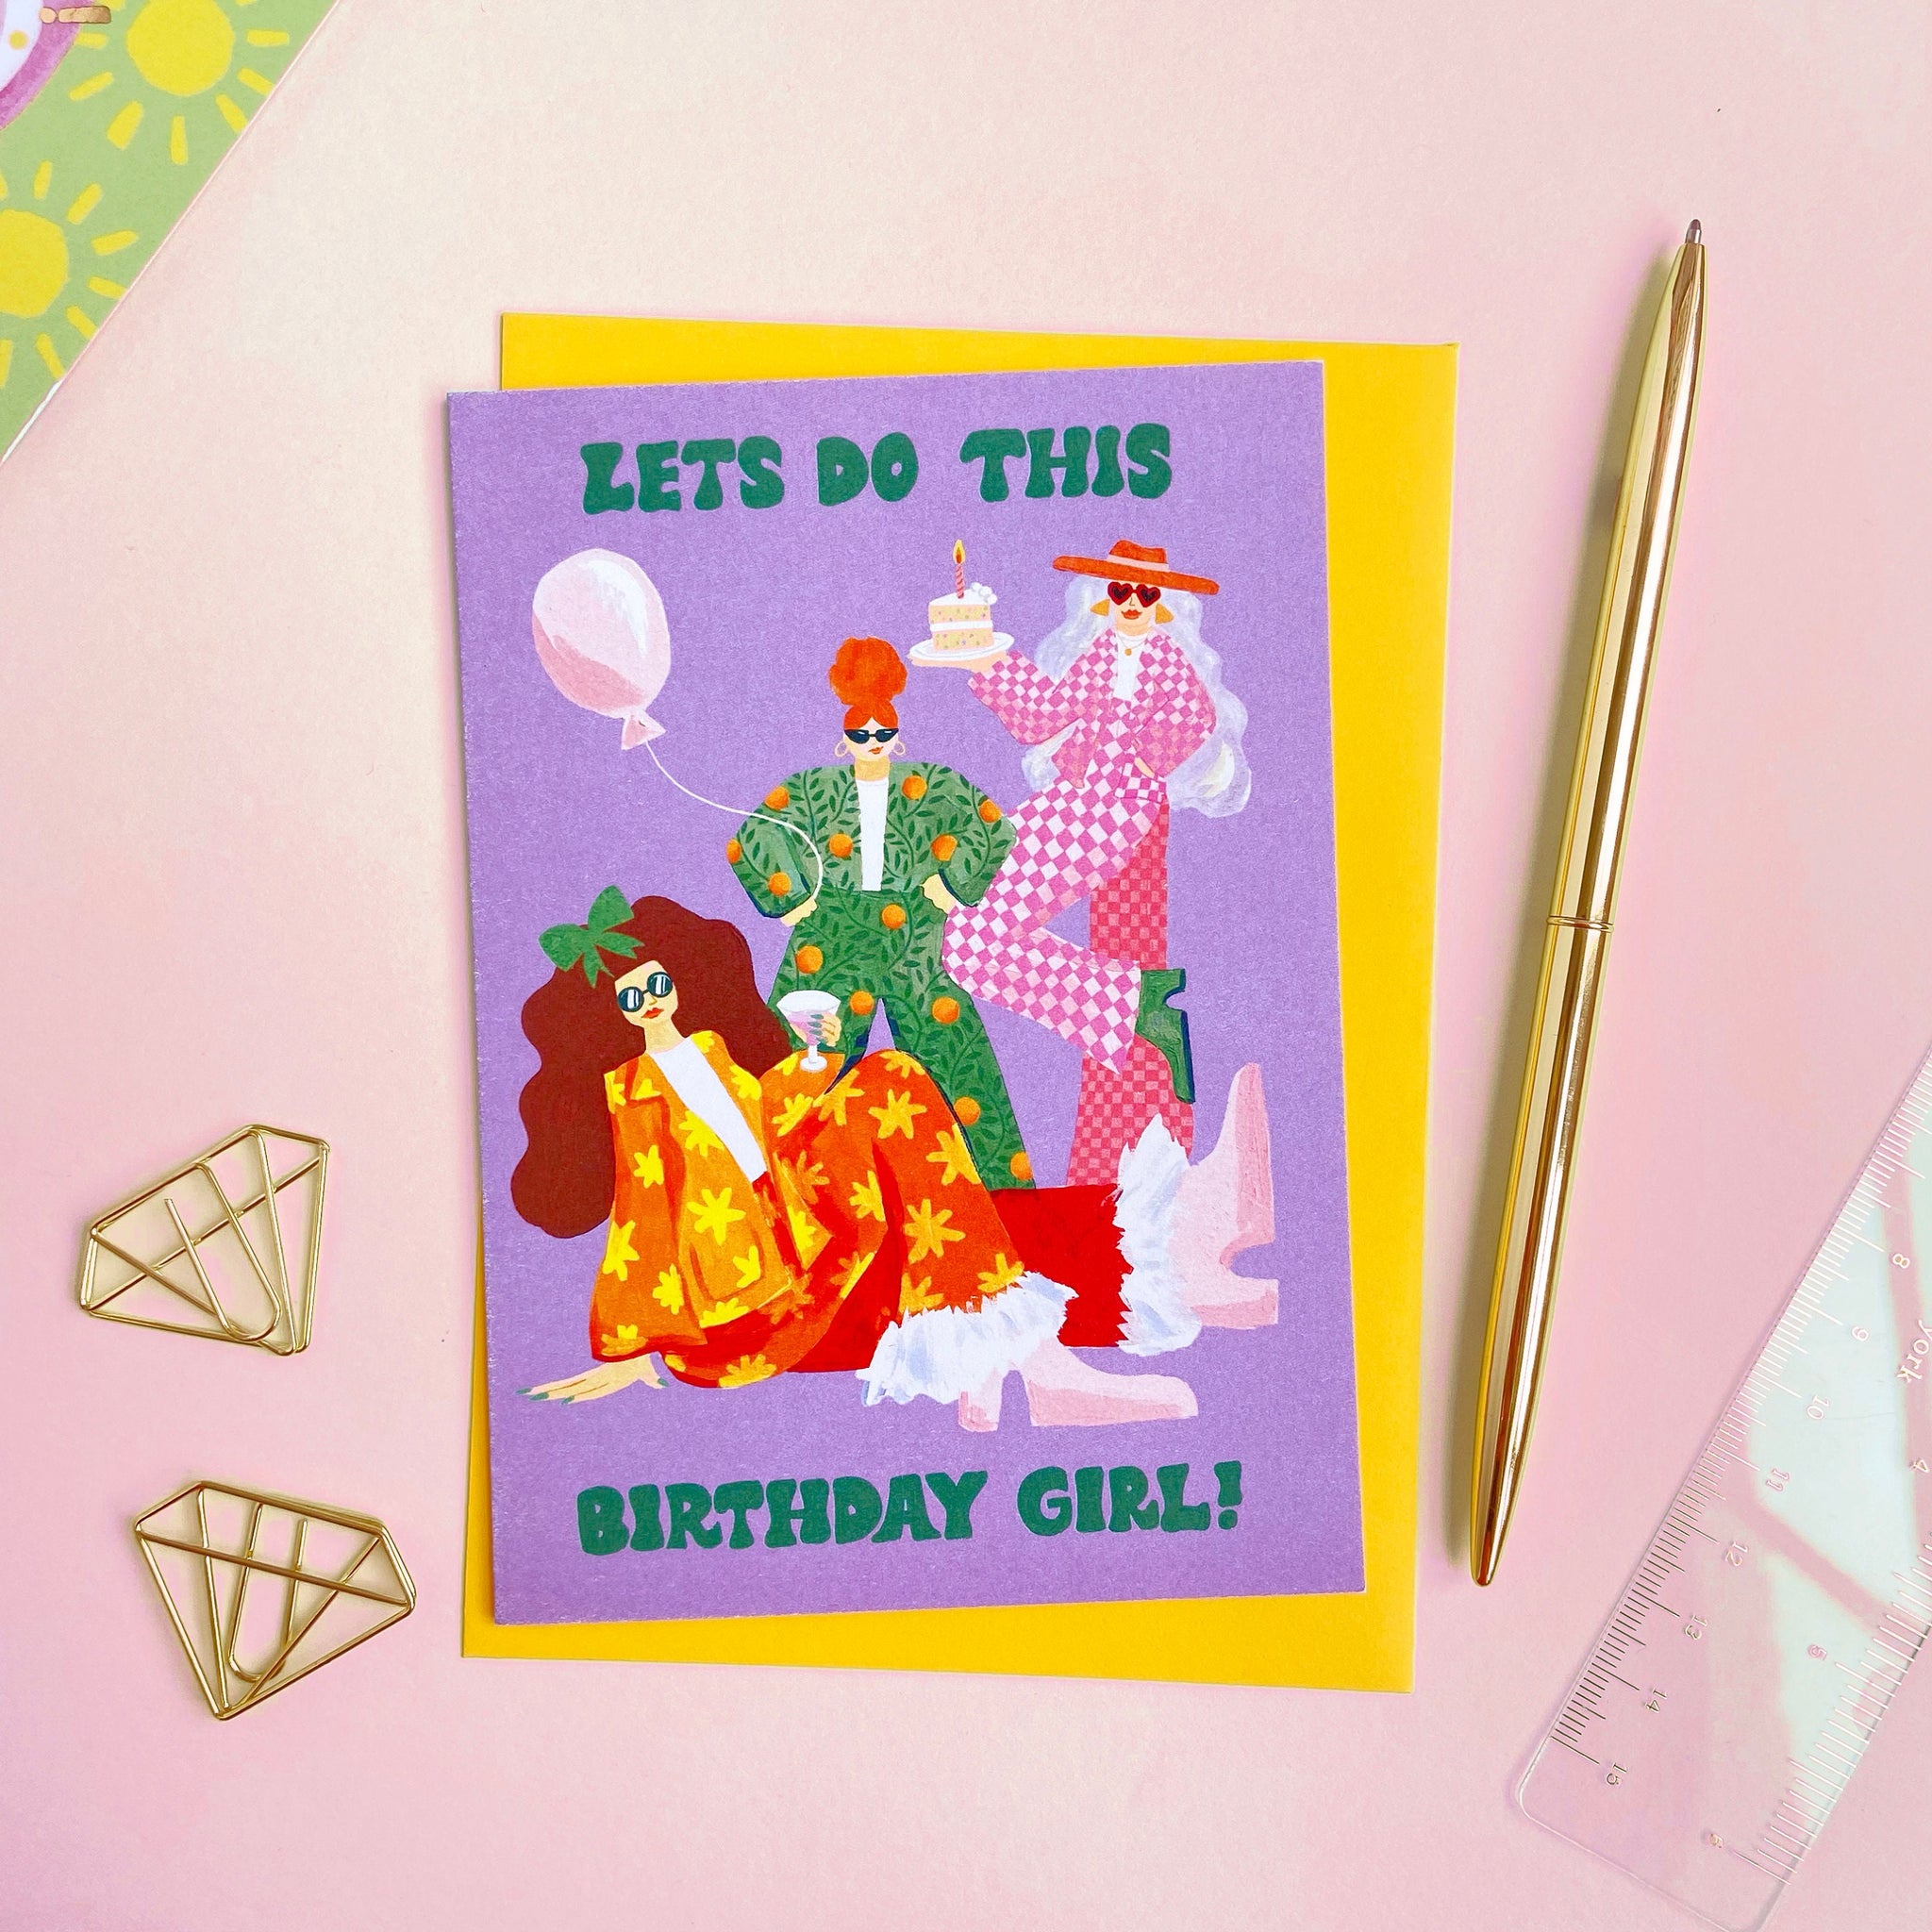 Birthday 'Lets do this' Card!